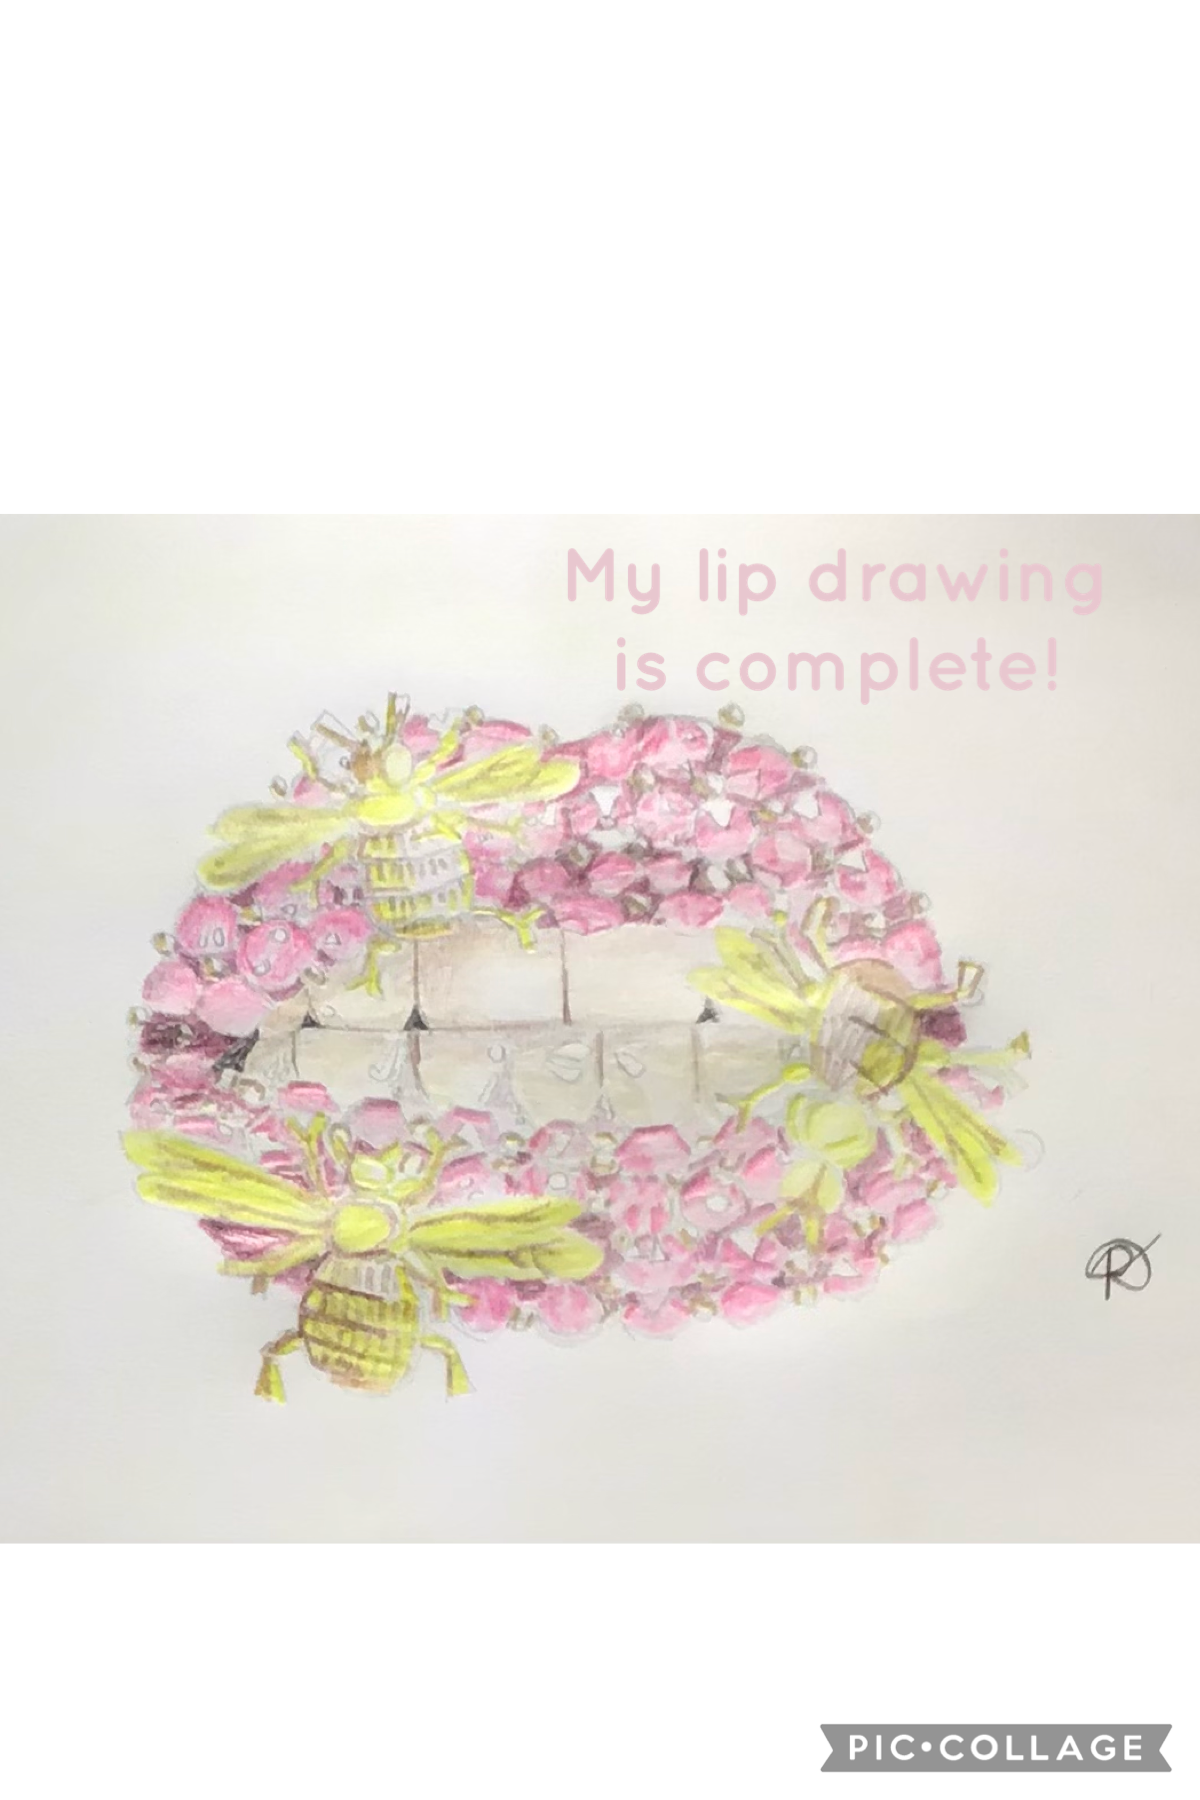 My lip drawing is complete!